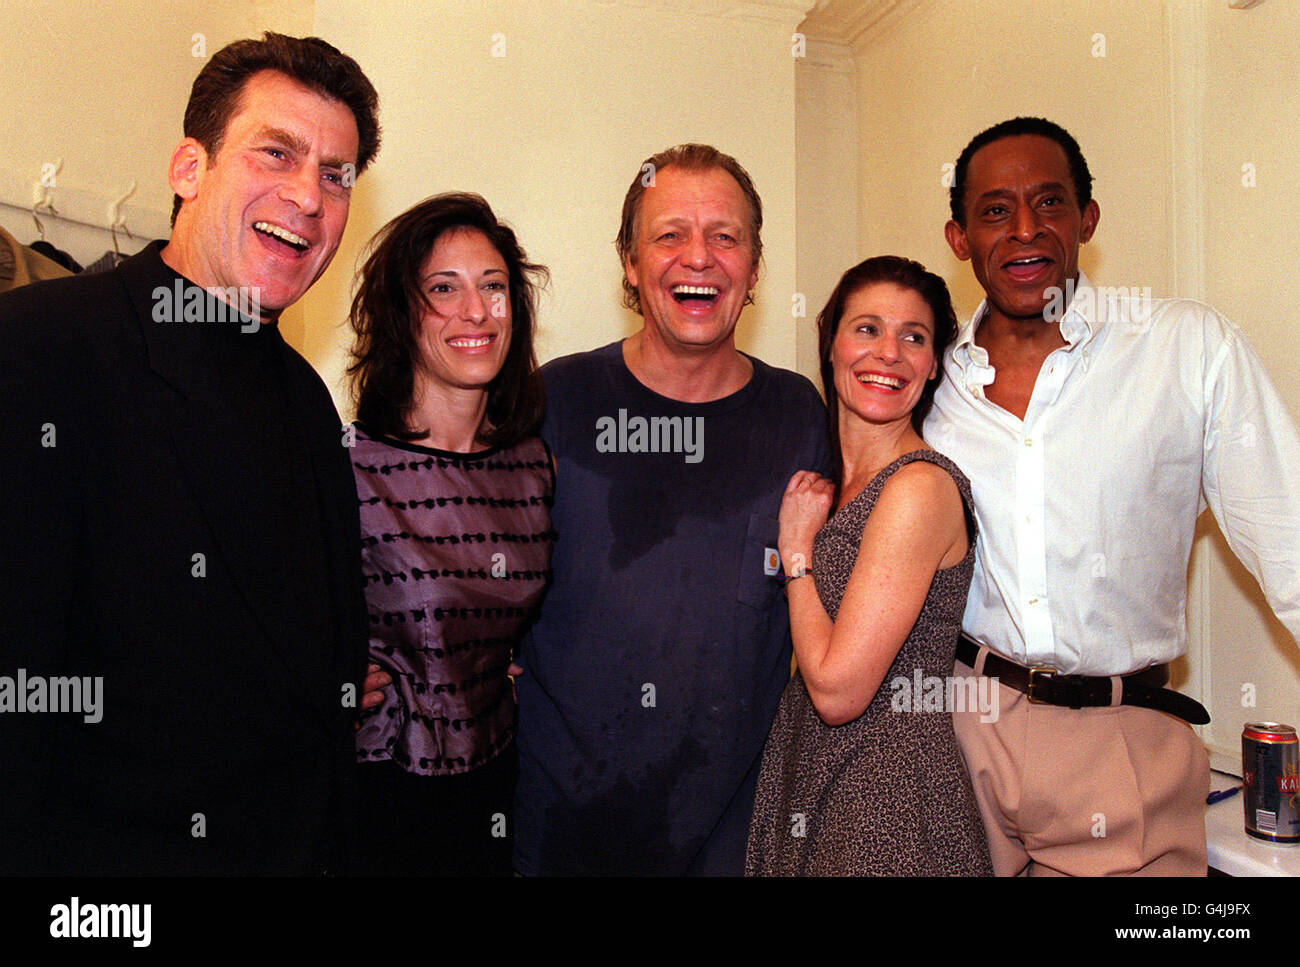 From left: Starsky and Hutch stars Paul Michael Glaser (Starsky), his wife Tracy , David Soul (Hutch), actress Alexa Hamilton and Antonio Fargas (Huggy Bear) at the opening night of 'Alive In The Fridge - The Dead Monkey,' at The Fridge in Brixton, South London. * Soul, Fargas and Hamilton appear in the production. Stock Photo